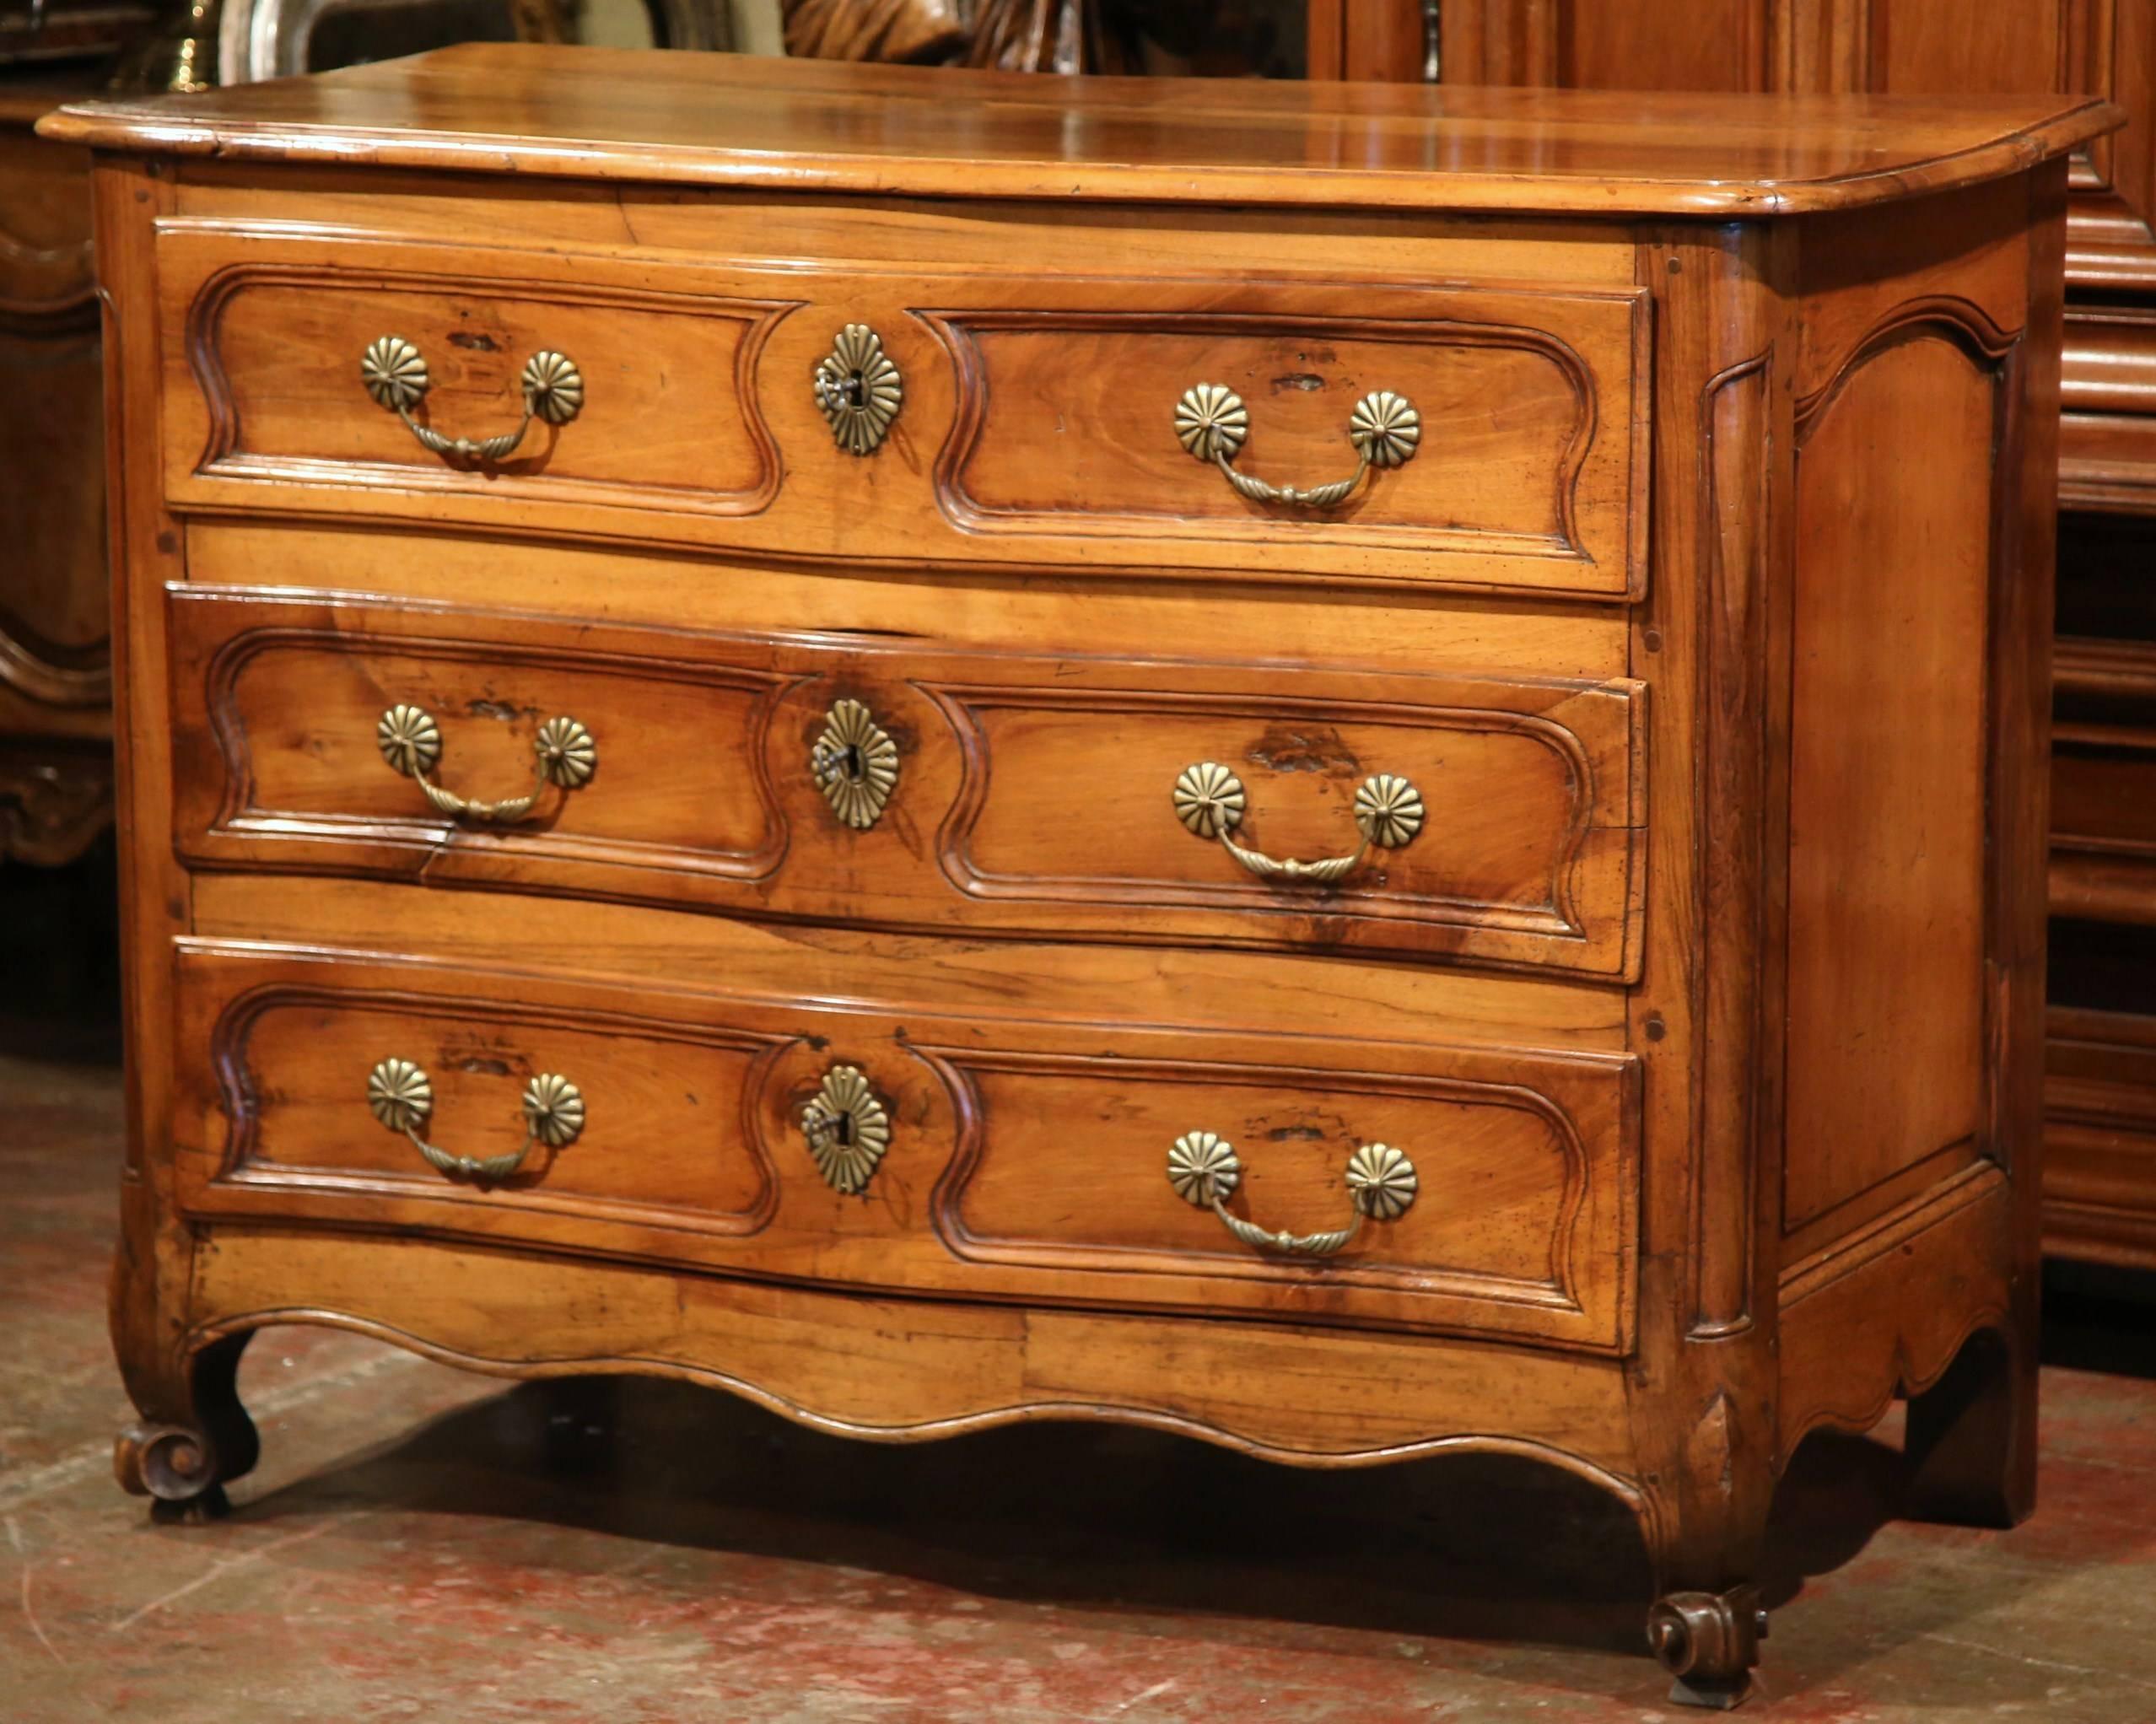 Bronze Mid-18th Century French Louis XV Carved Walnut Chest of Drawers from Burgundy